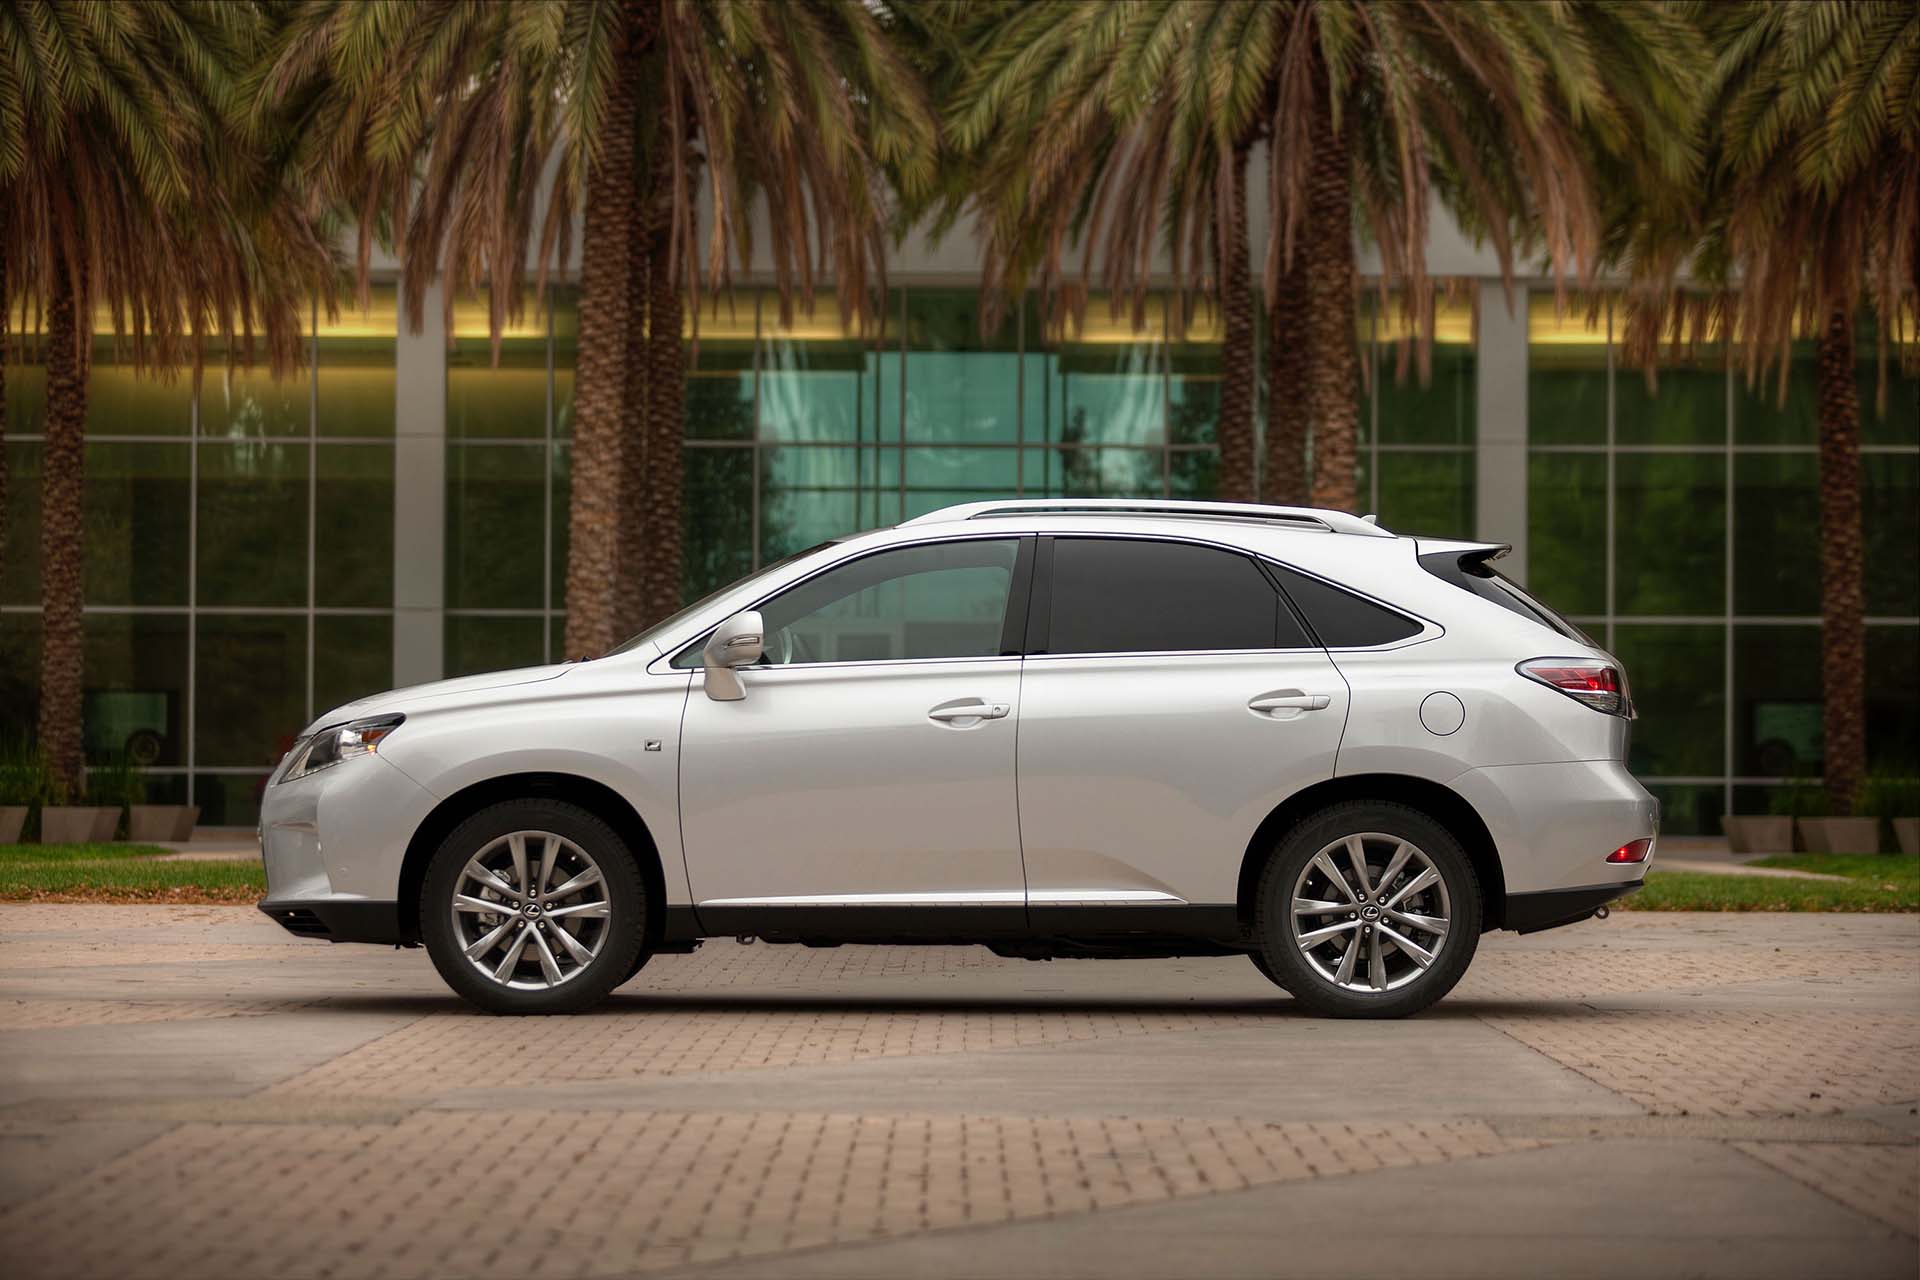 The third-generation Lexus RX came with the expected host of upgrades, from bumps in displacement (to 3.5L) and power (275 hp) to improved ergonomics and greater passenger area.